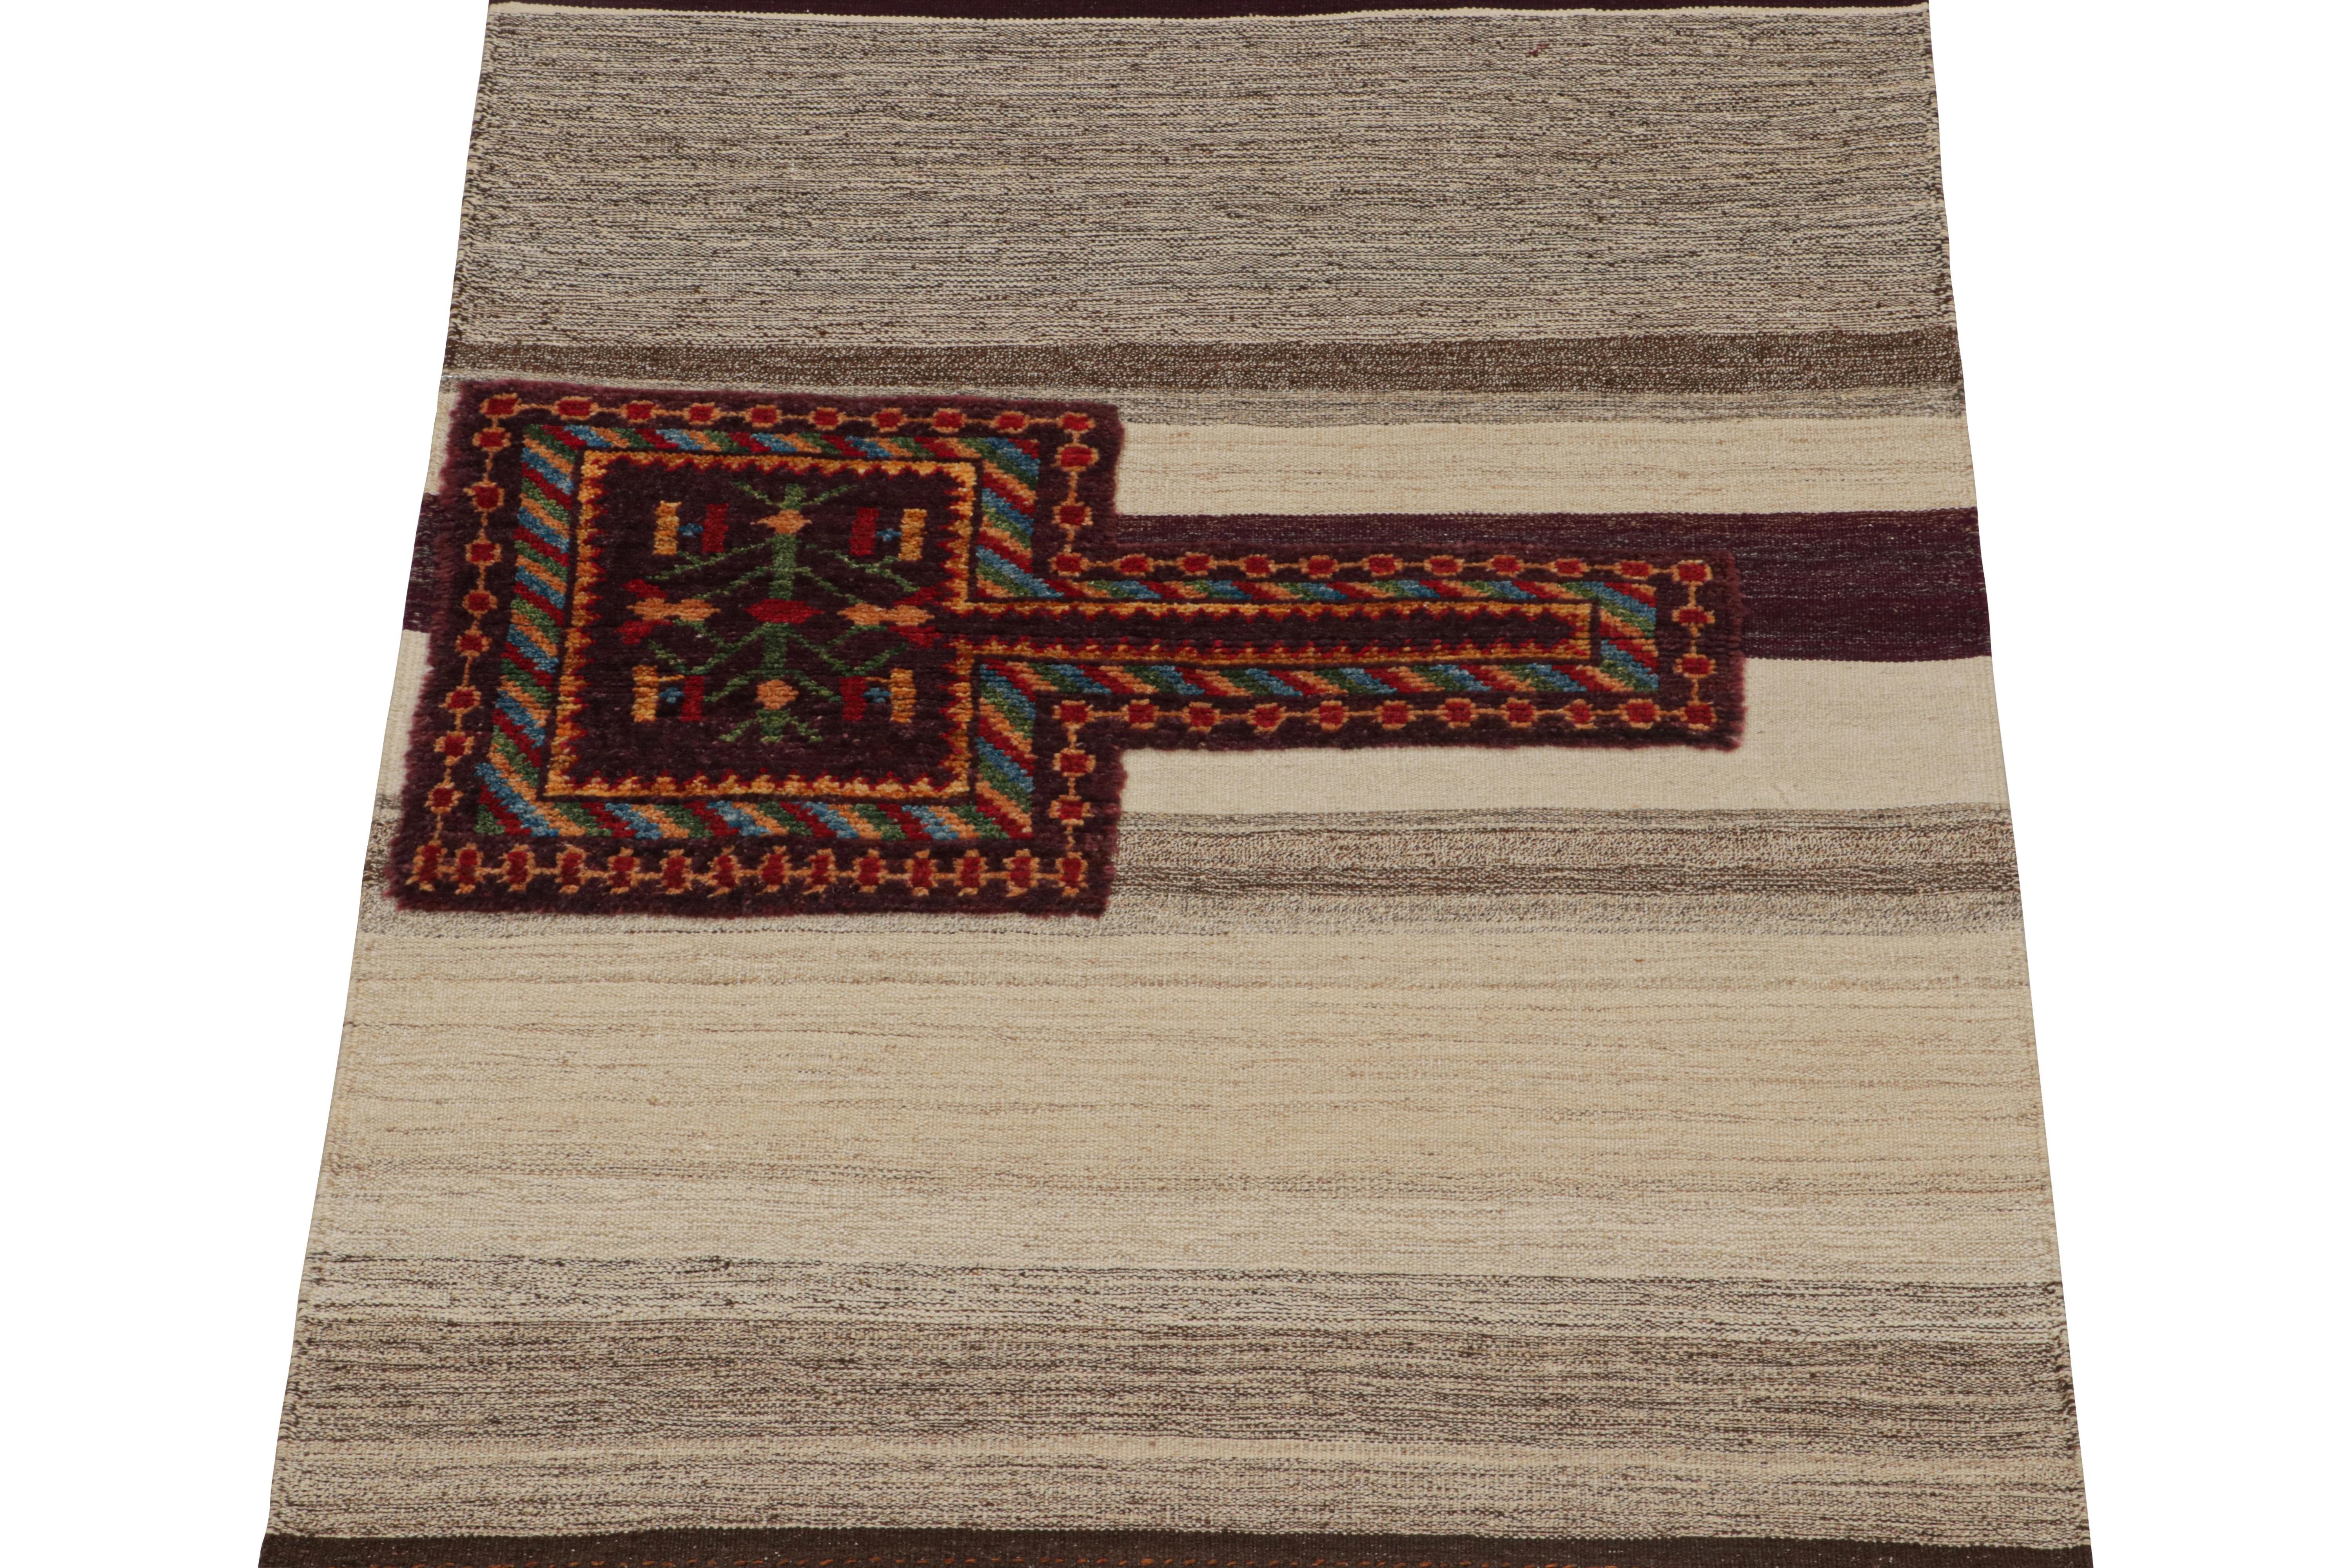 This contemporary 3x4 Persian Kilim is an exciting new addition to the collection by Rug & Kilim.

Handwoven in wool, its design is inspired by antique Persian Tacheh—a tribal “bag” style of flat weave. This technique weaves pile and flat weave